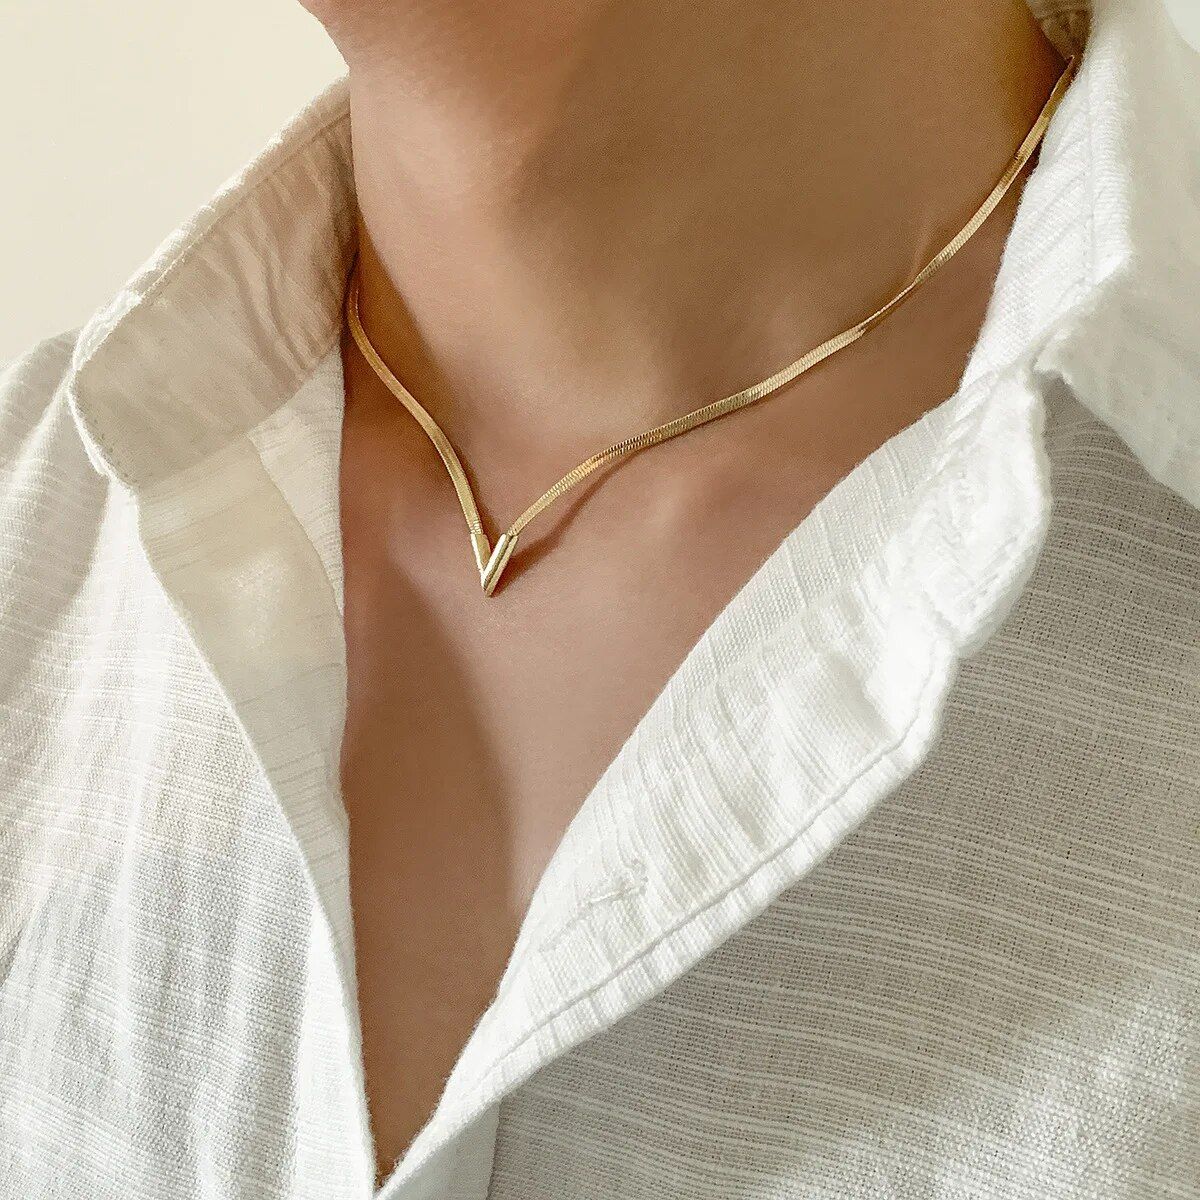 Close-up of a person wearing an Elegant V-Shaped Flat Snake Chain Necklace, showcasing the latest fashion trend, over an open white shirt collar.